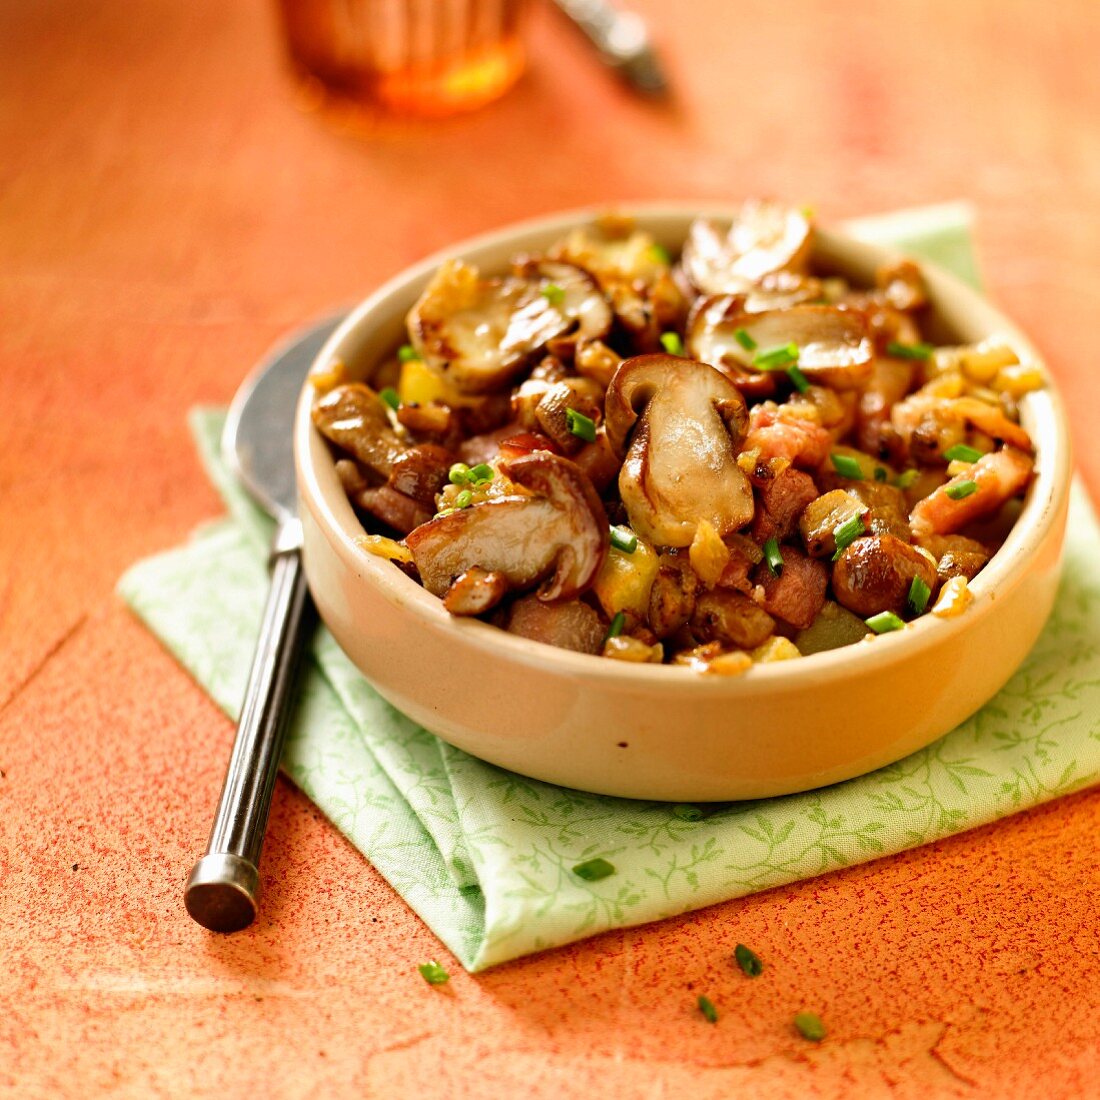 Pan-fried ceps with diced bacon